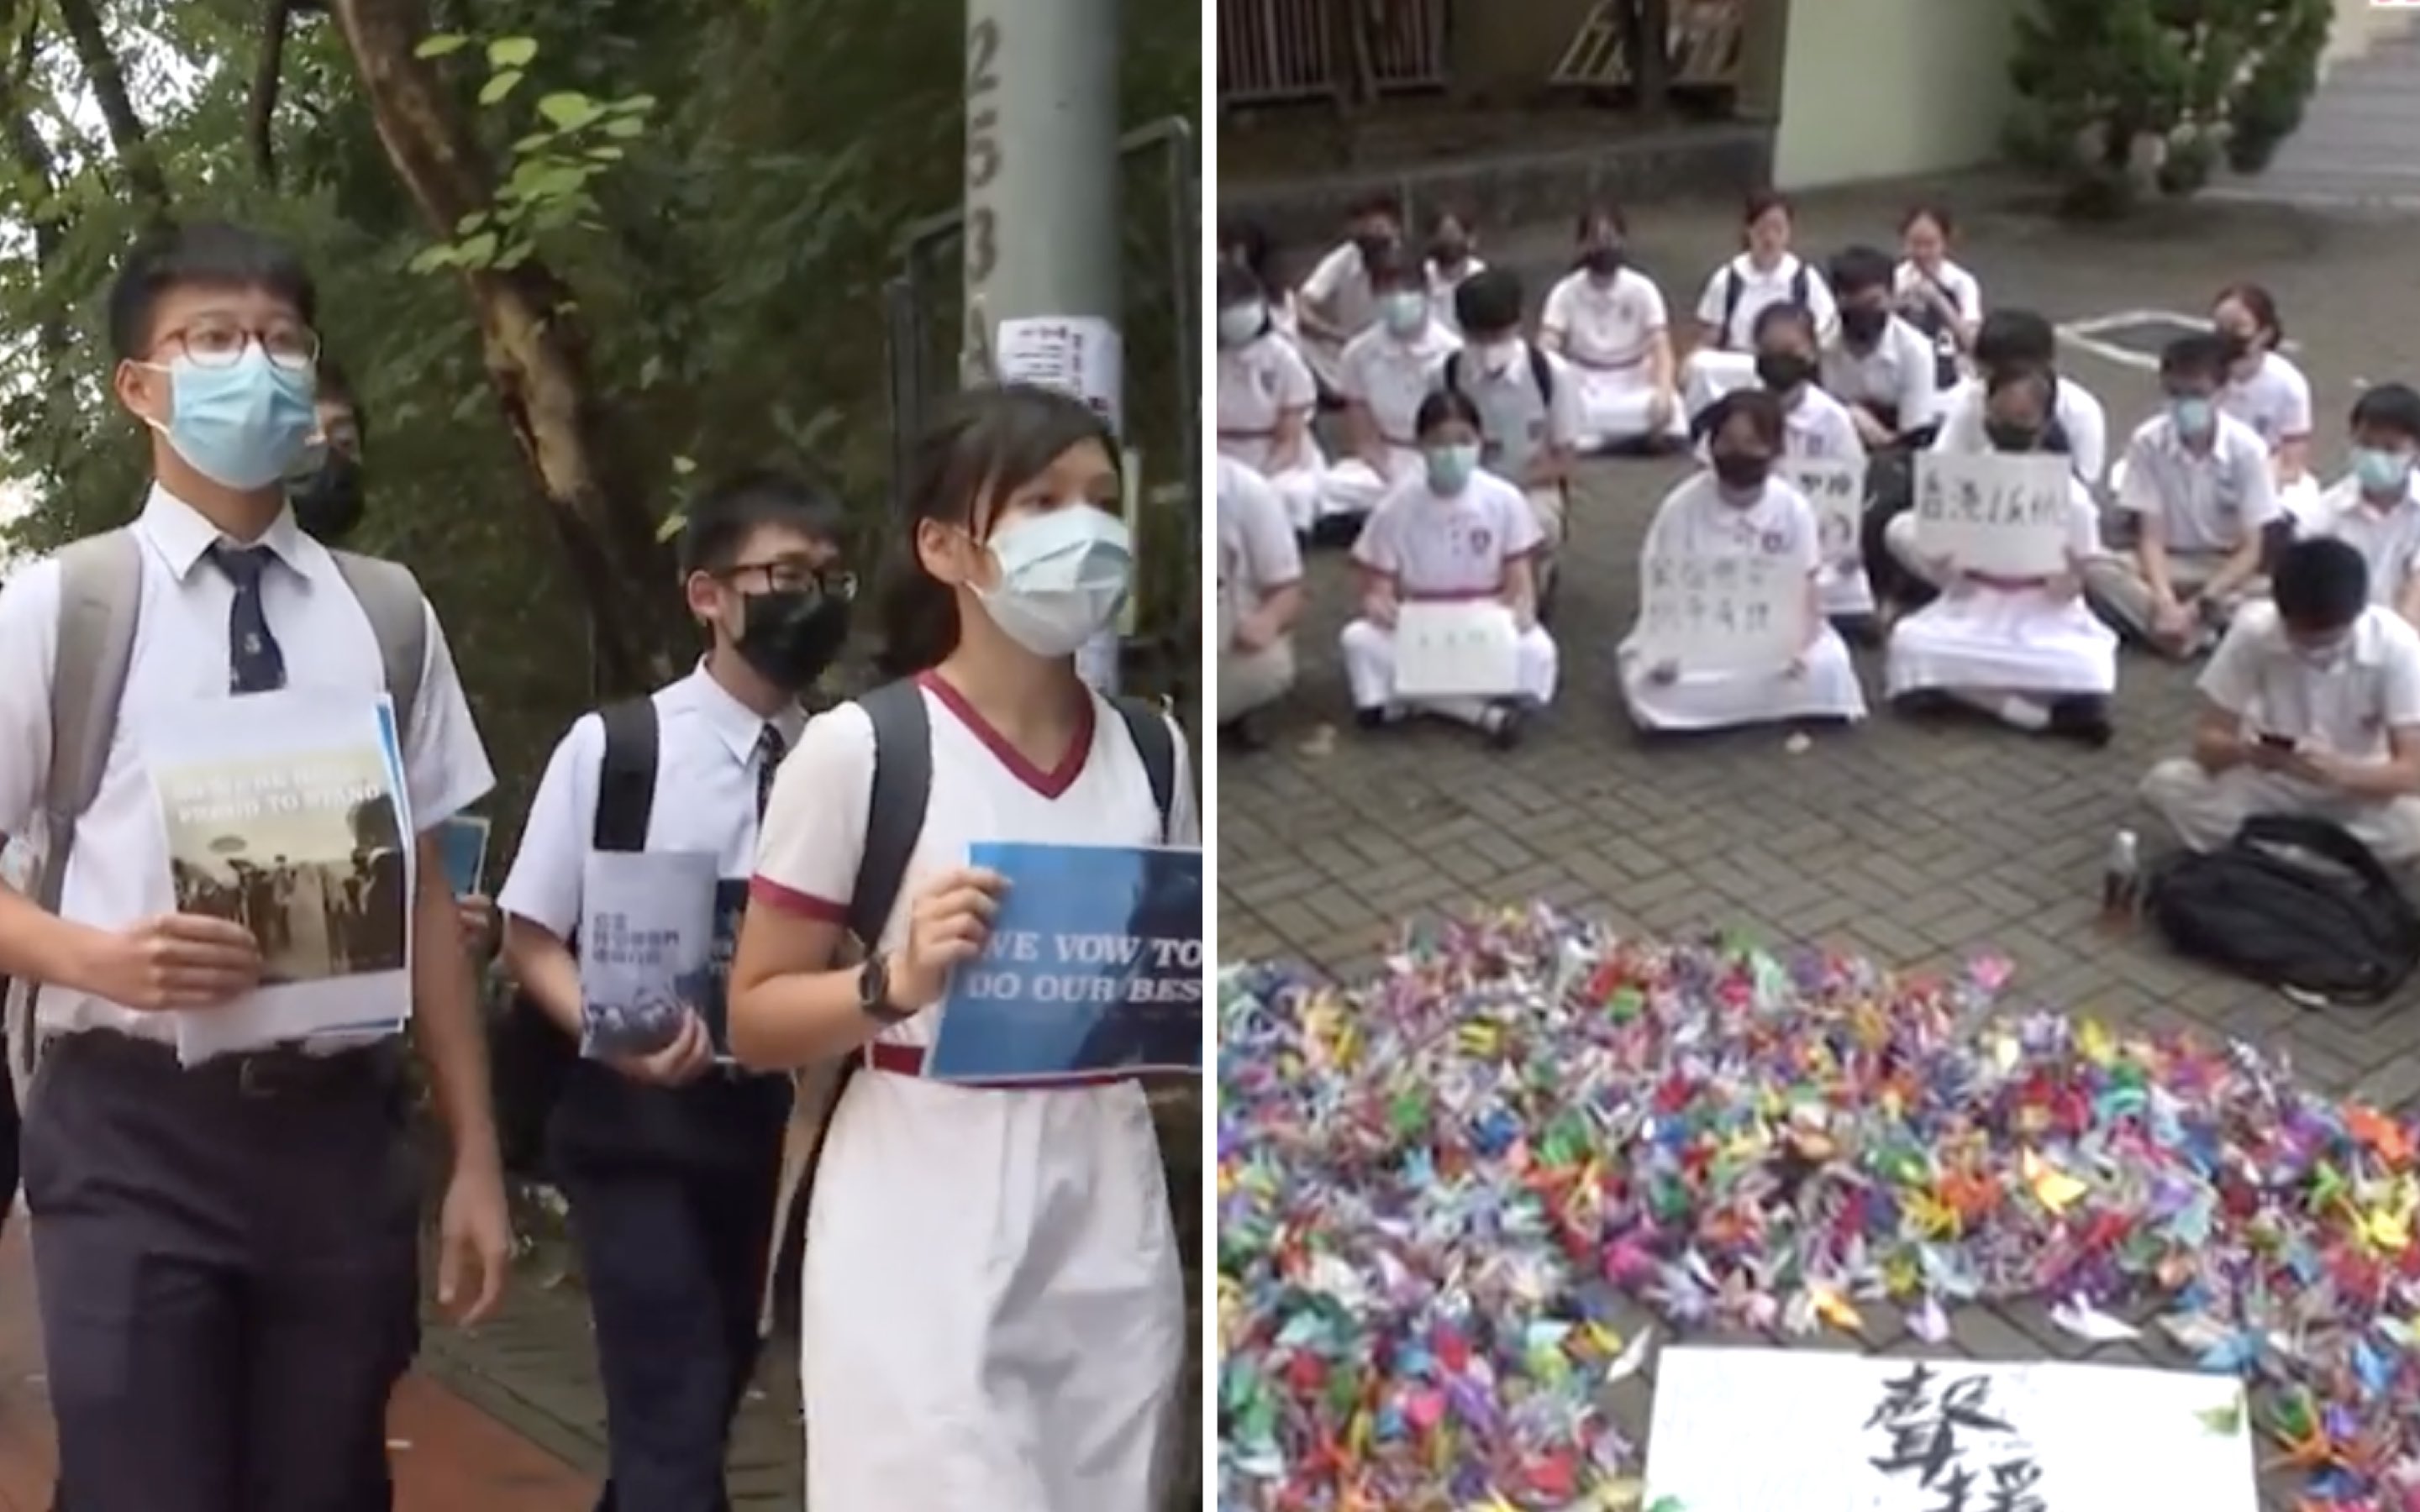 Students in all parts of the city defy a ban on face masks in public after the authorities announced that they would be asking schools to report the number of students wearing face masks. Screengrabs via Facebook video/RTHK and Apple Daily video.